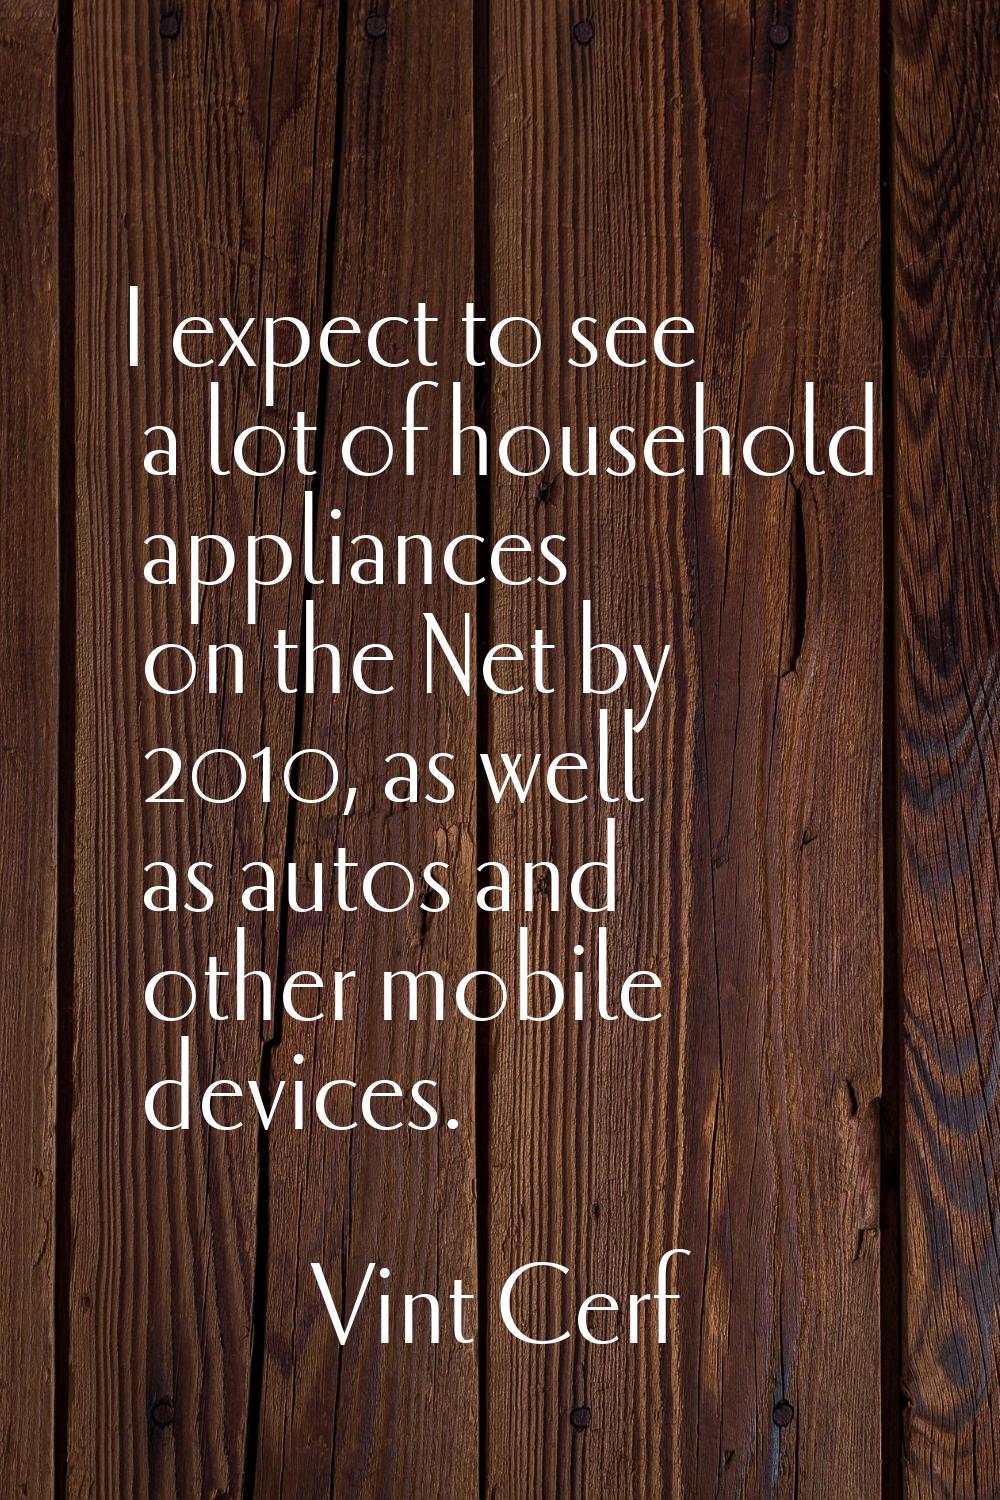 I expect to see a lot of household appliances on the Net by 2010, as well as autos and other mobile